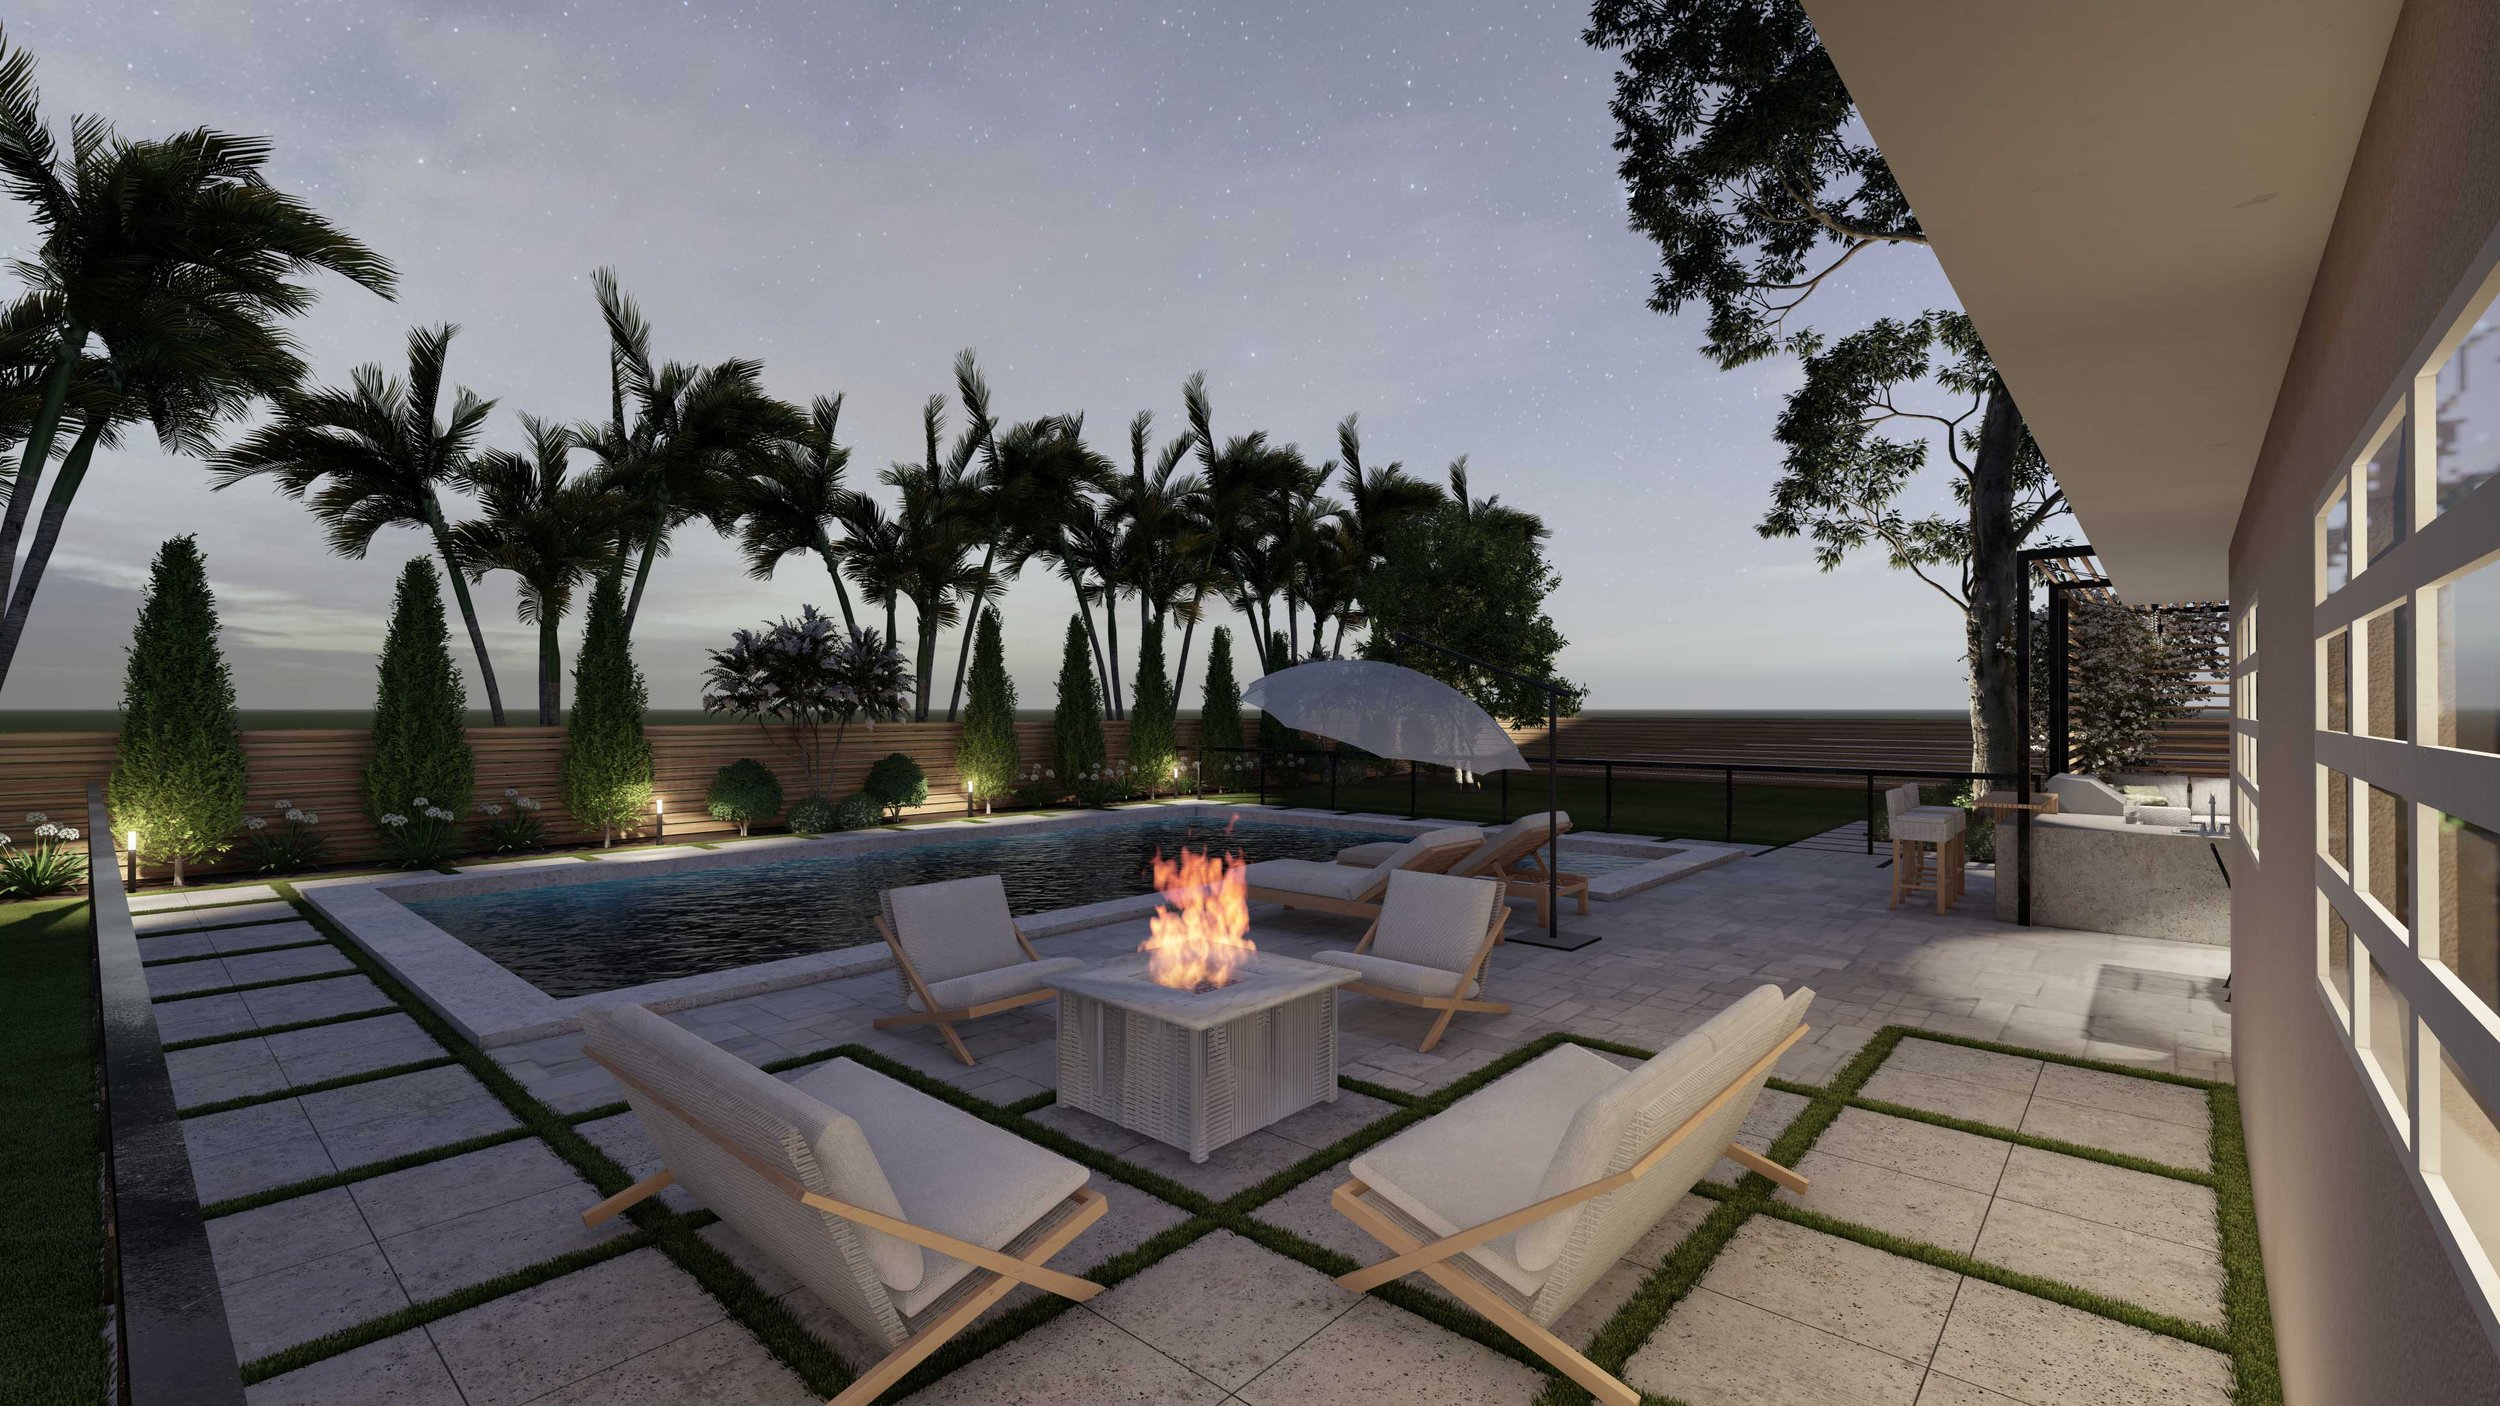 Nighttime view of backyard with covered outdoor dining area and outdoor kitchen near an in ground swimming pool near lounge area with fire pit